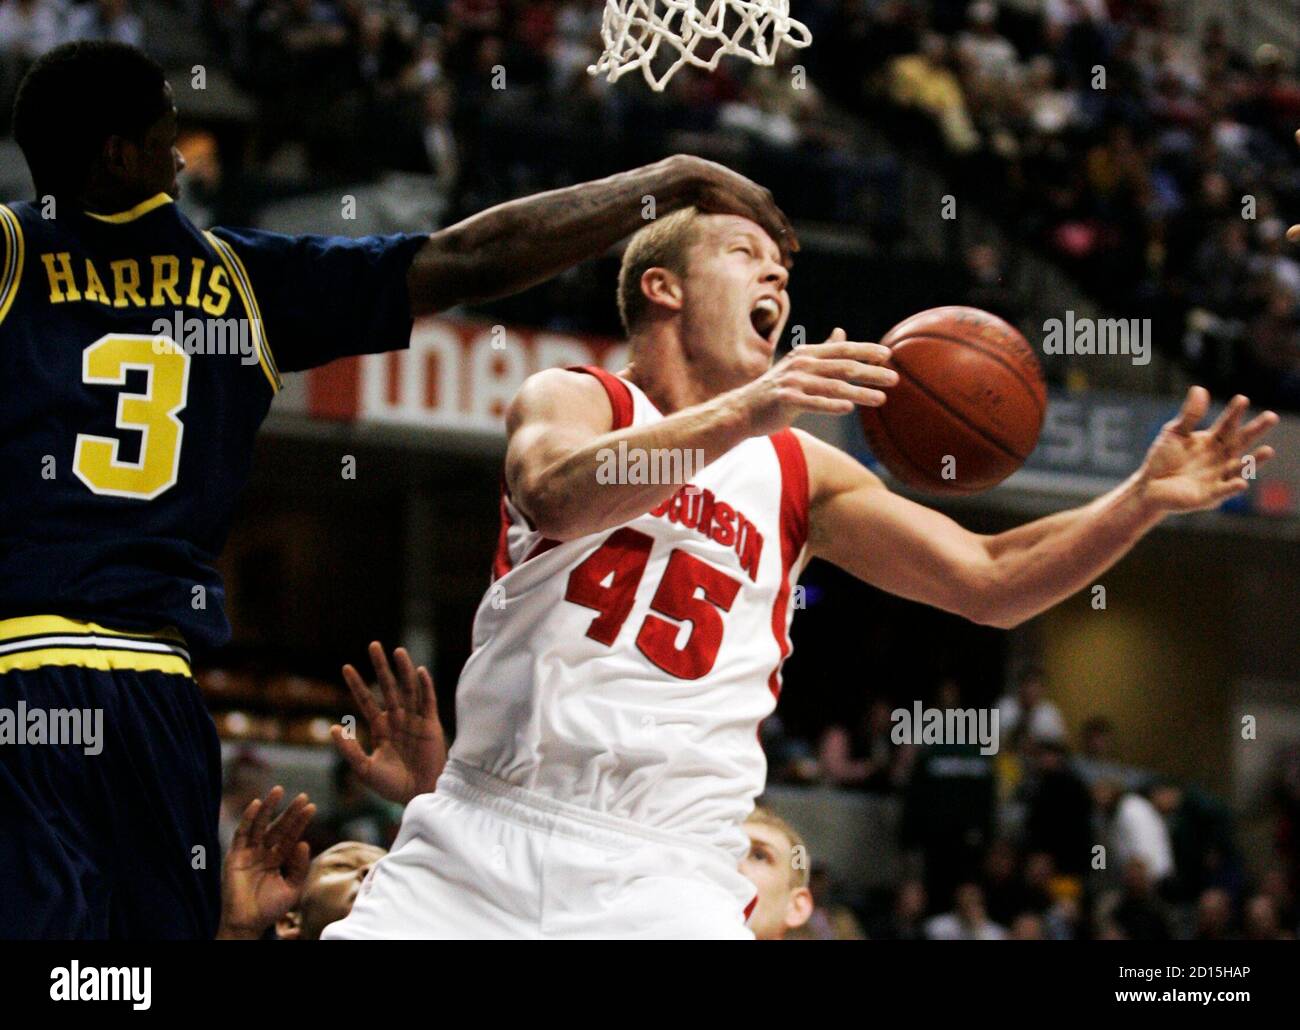 University of Michigan guard Manny Harris (L) and University of Wisconsin  forward Joe Krabbenhoft battle for the ball during the second half of their  Big Ten mens basketball tournament game in Indianapolis